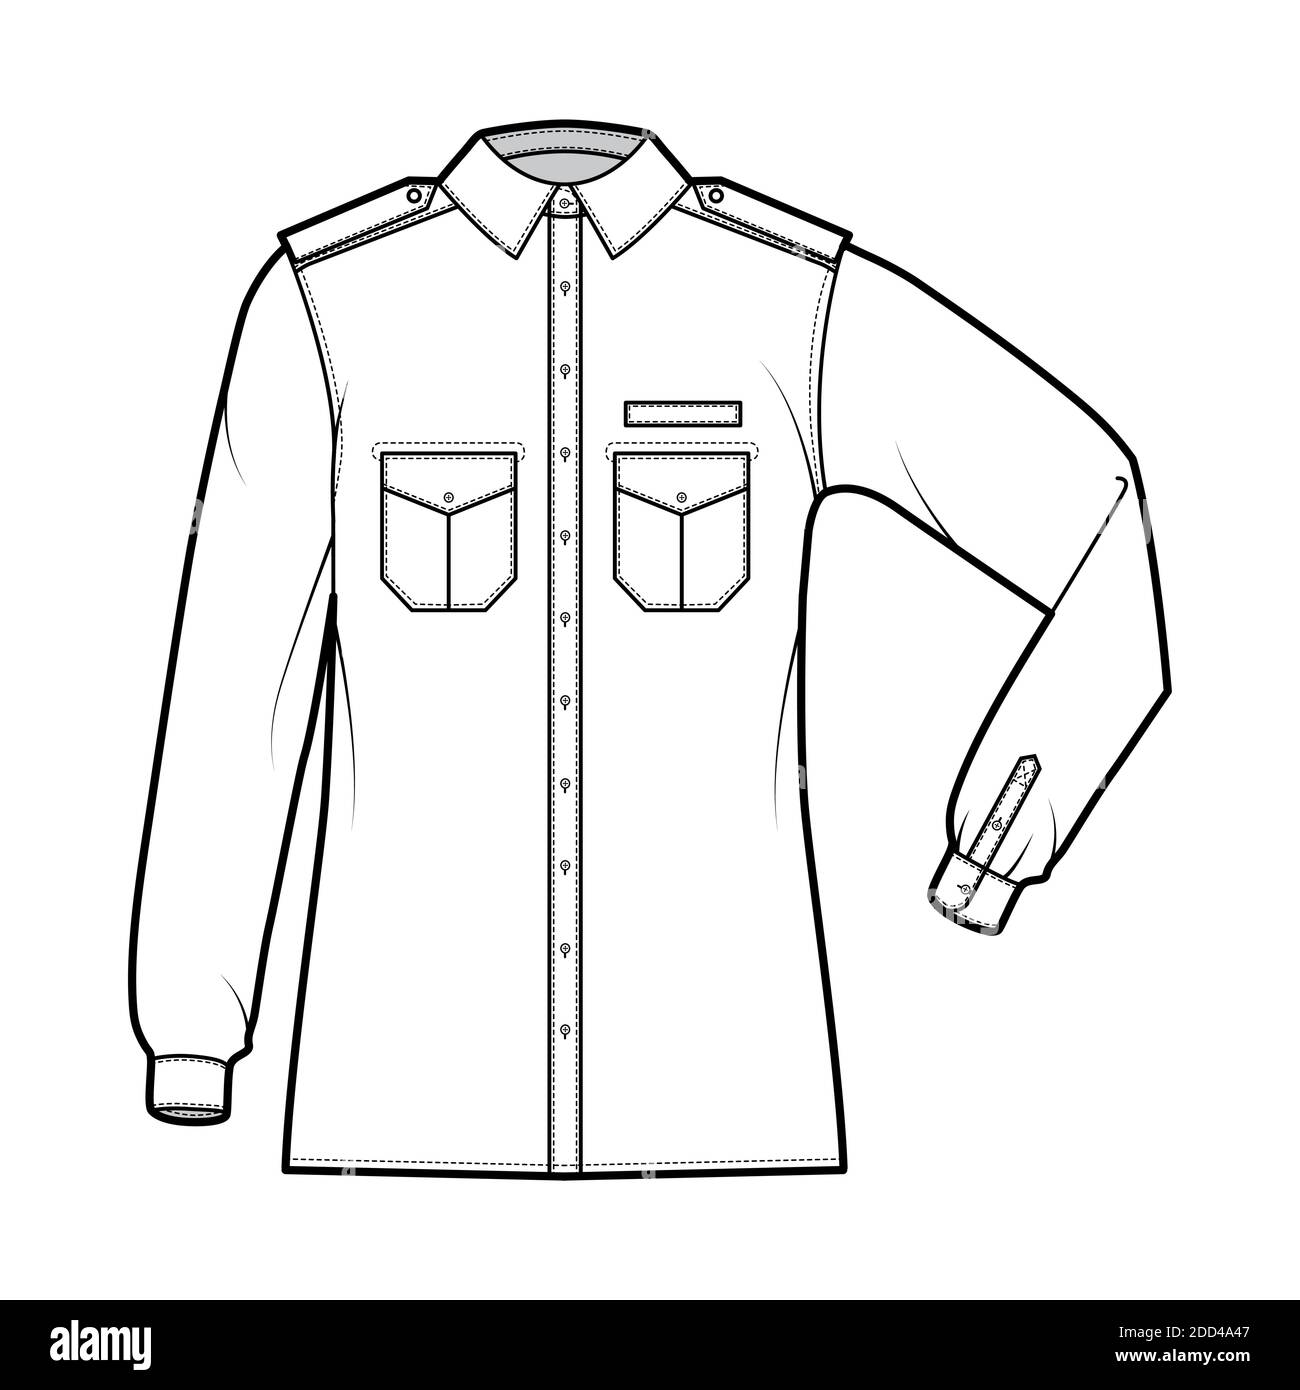 Shirt military technical fashion illustration with epaulette, flaps angled pockets, elbow fold long sleeve, relax fit, button-down, collar. Flat template front, white color. Women men unisex top CAD Stock Vector